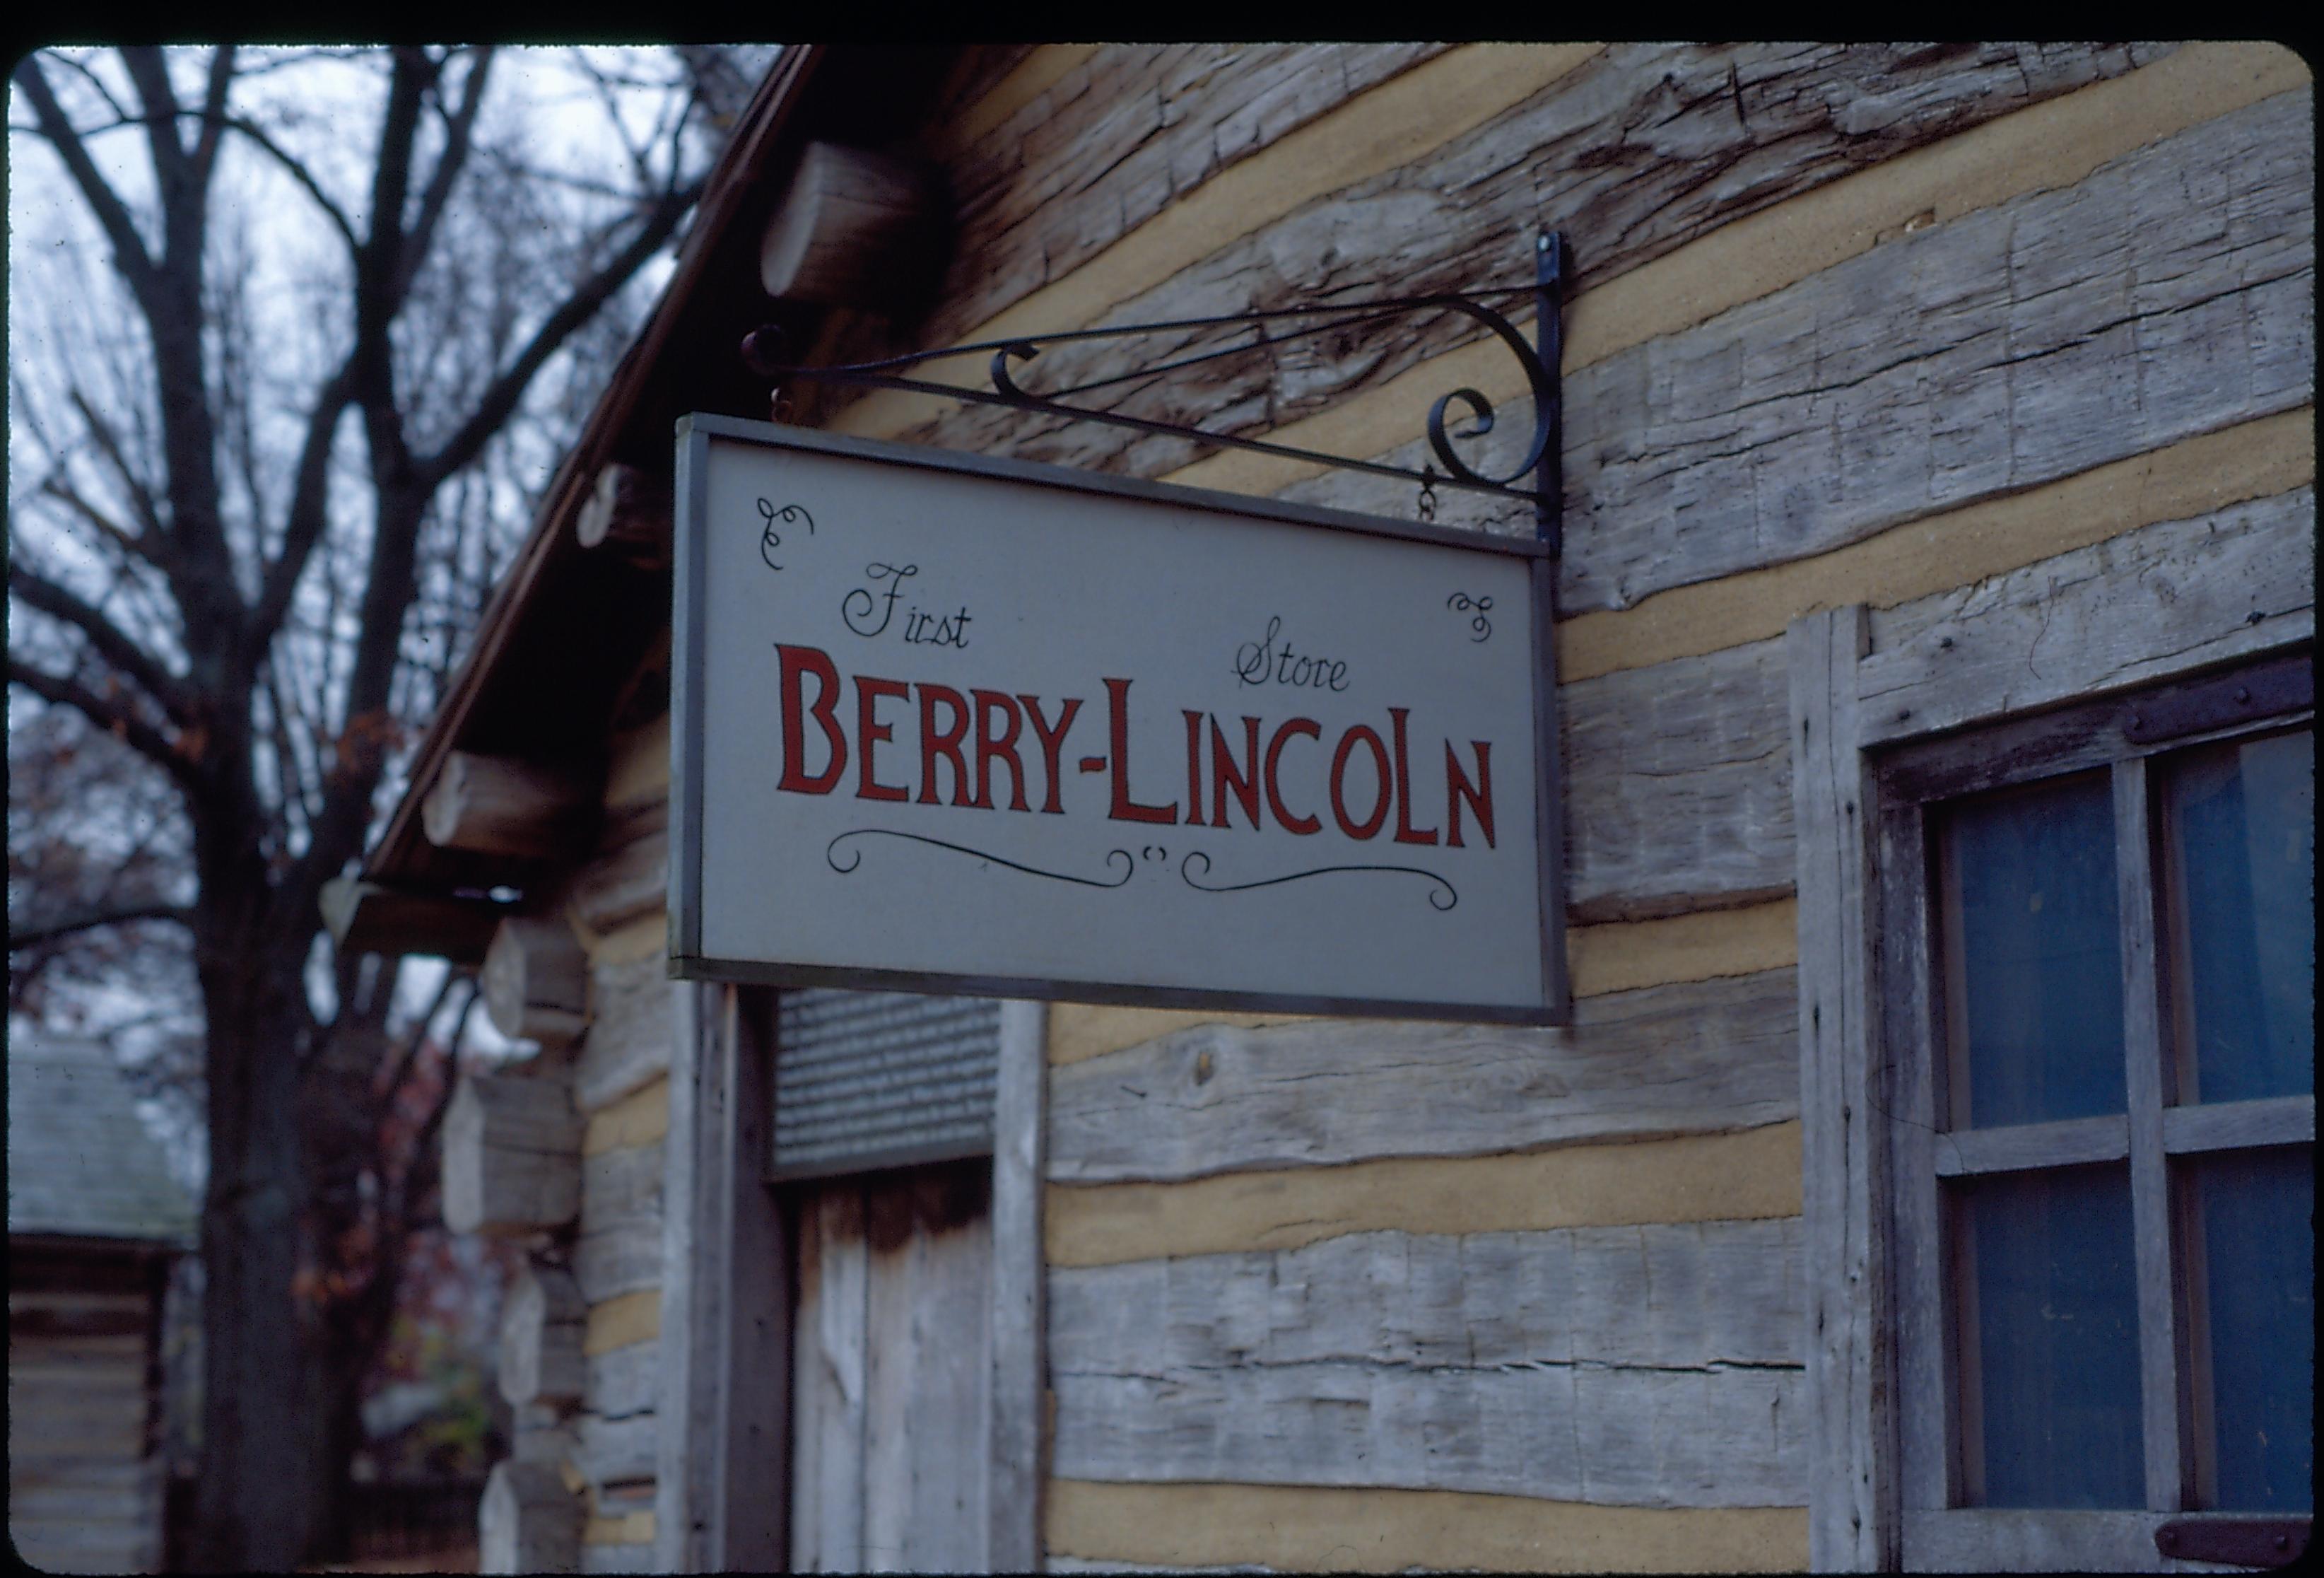 First Berry-Lincoln Store - New Salem